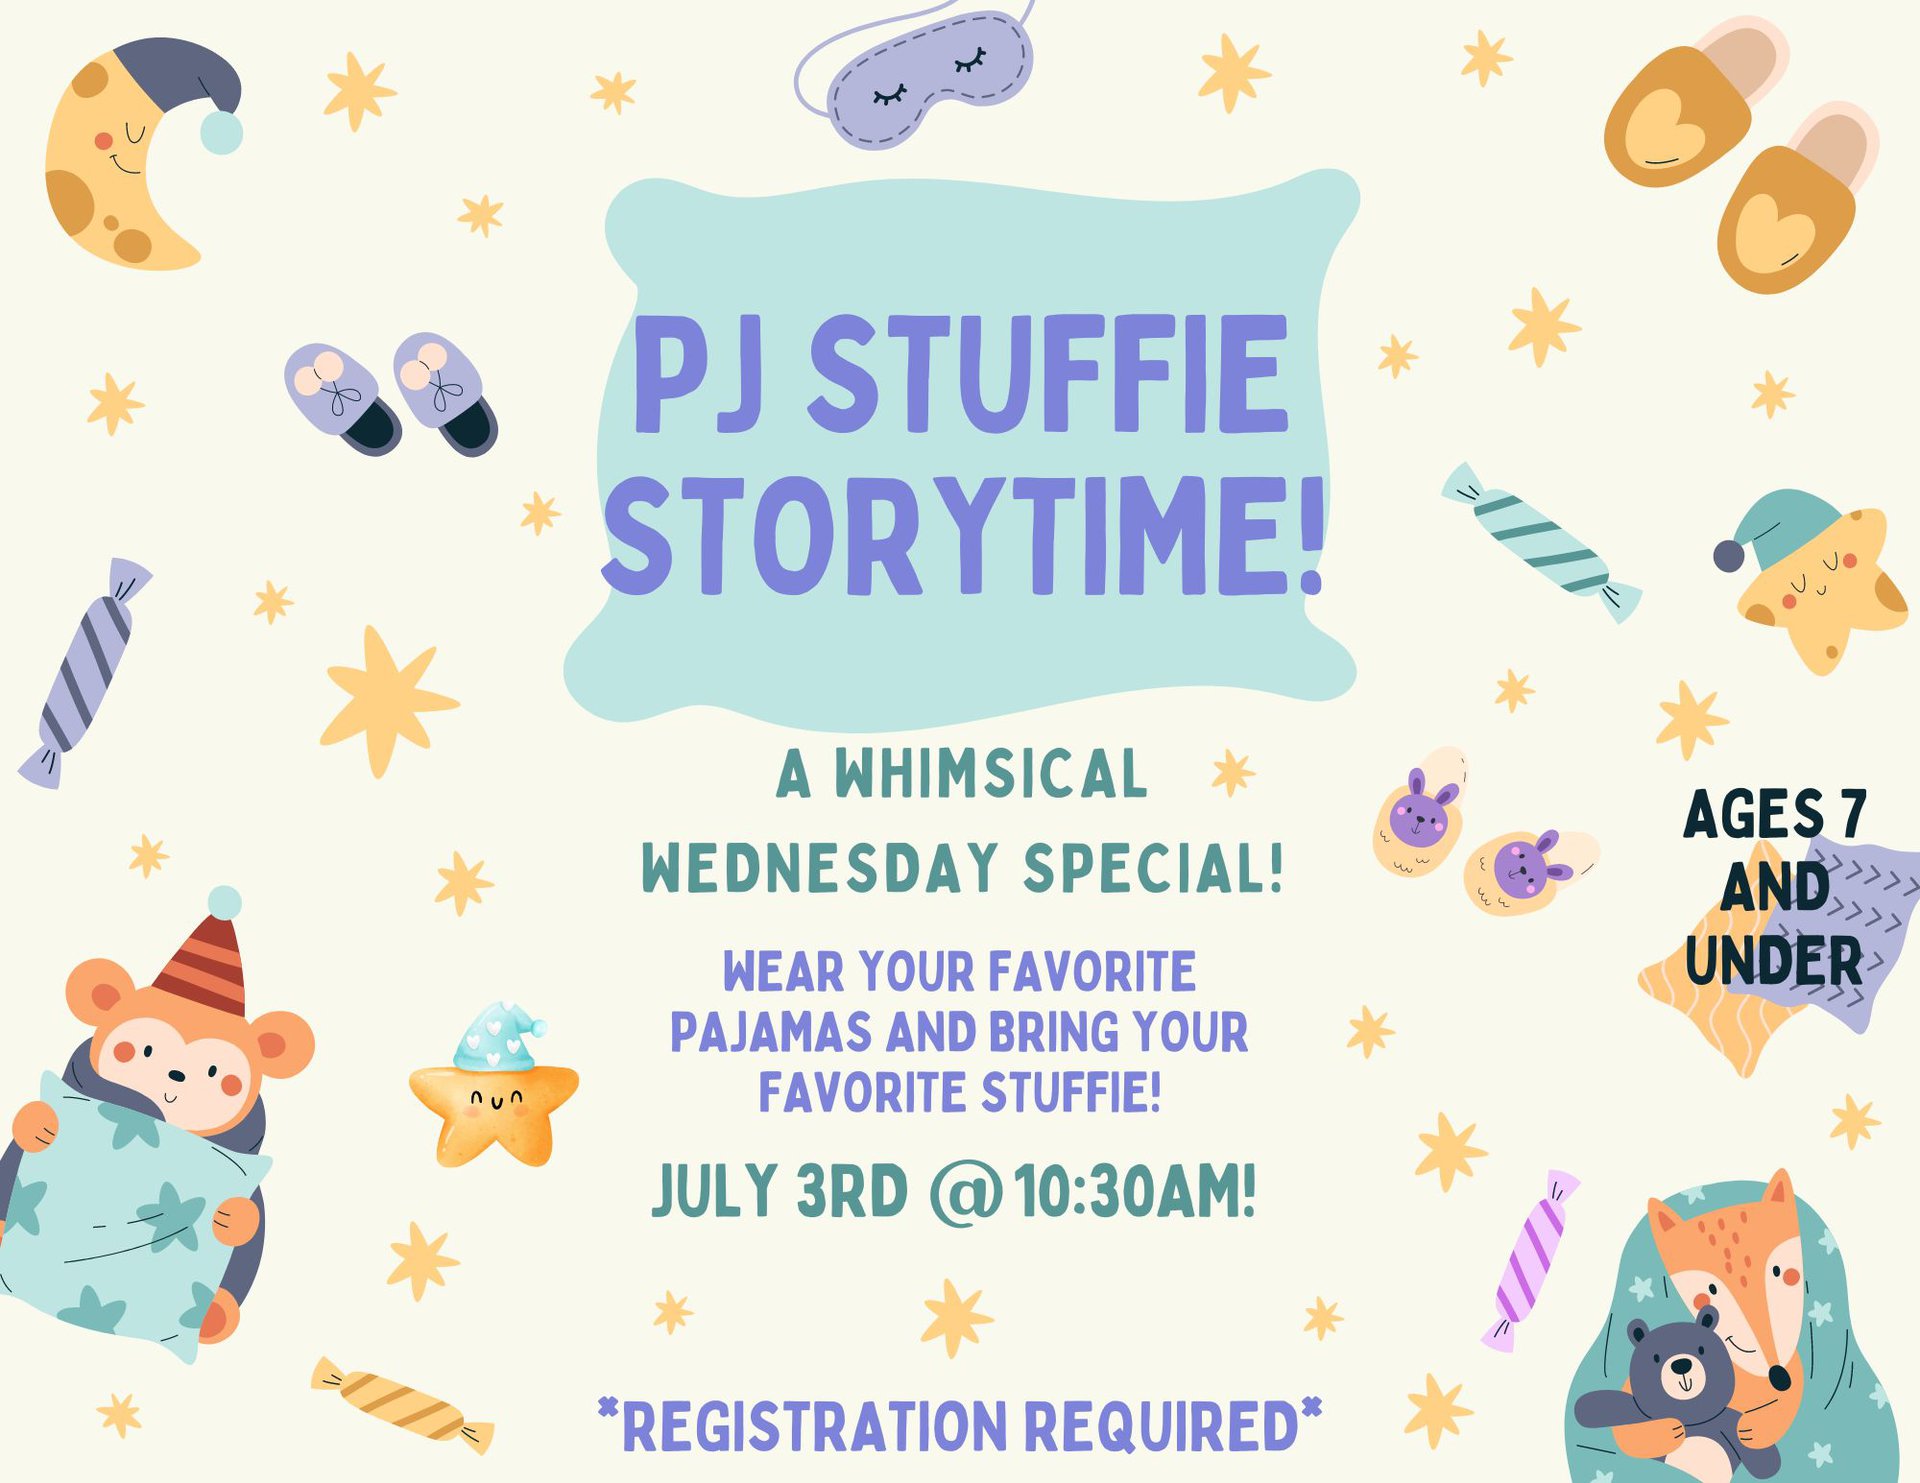 PJ Storytime Party: Whimsical Wednesday Special. Wednesday, July 3 at 10:30 am.  A special Whimsical Wednesday for our first storytime back in July! Wear your favorite pajamas and bring your favorite stuffie! After our Storytime, stay for stuffie playtime and calming music! Children ages 5 and under with an adult. Registration Required.  